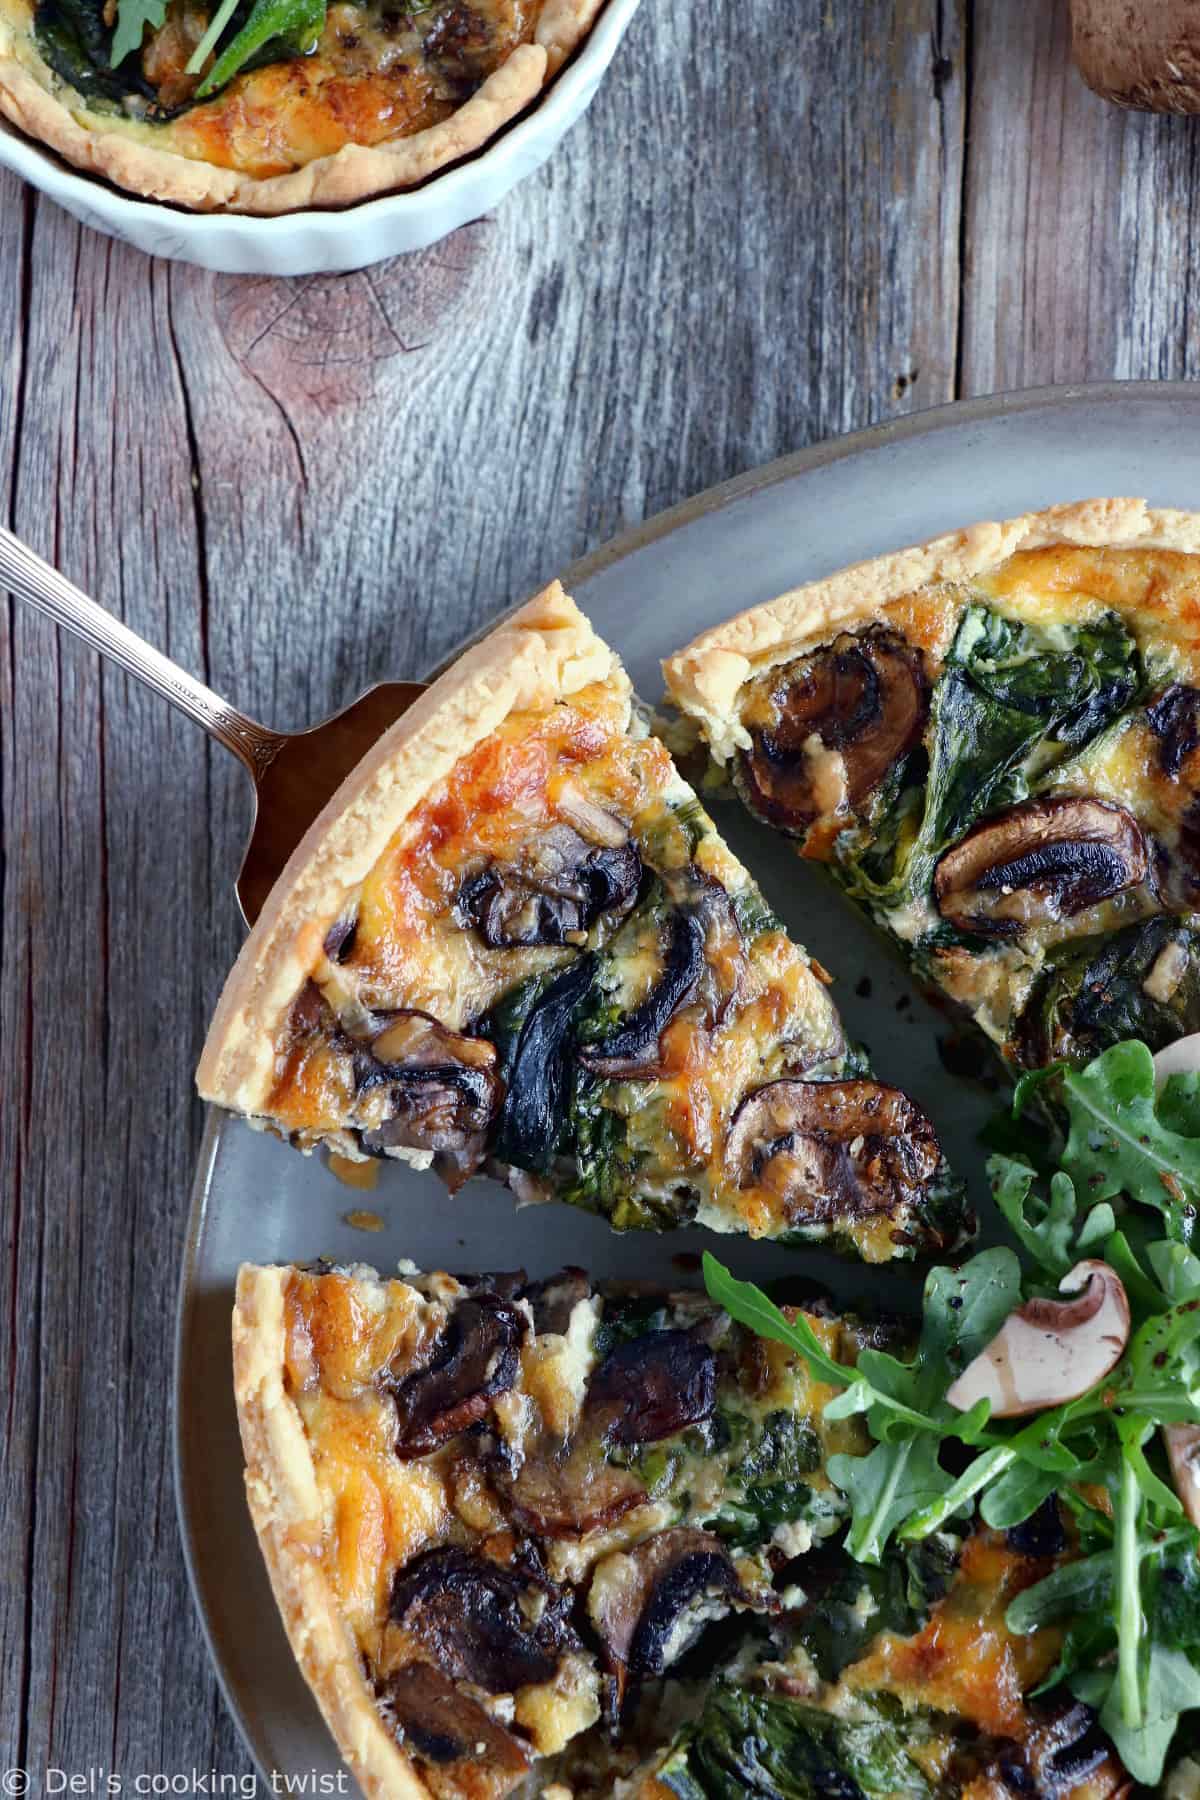 Spinach and mushroom quiche is the ideal family-friendly recipe for busy days or to enjoy in the weekend for a cozy brunch.